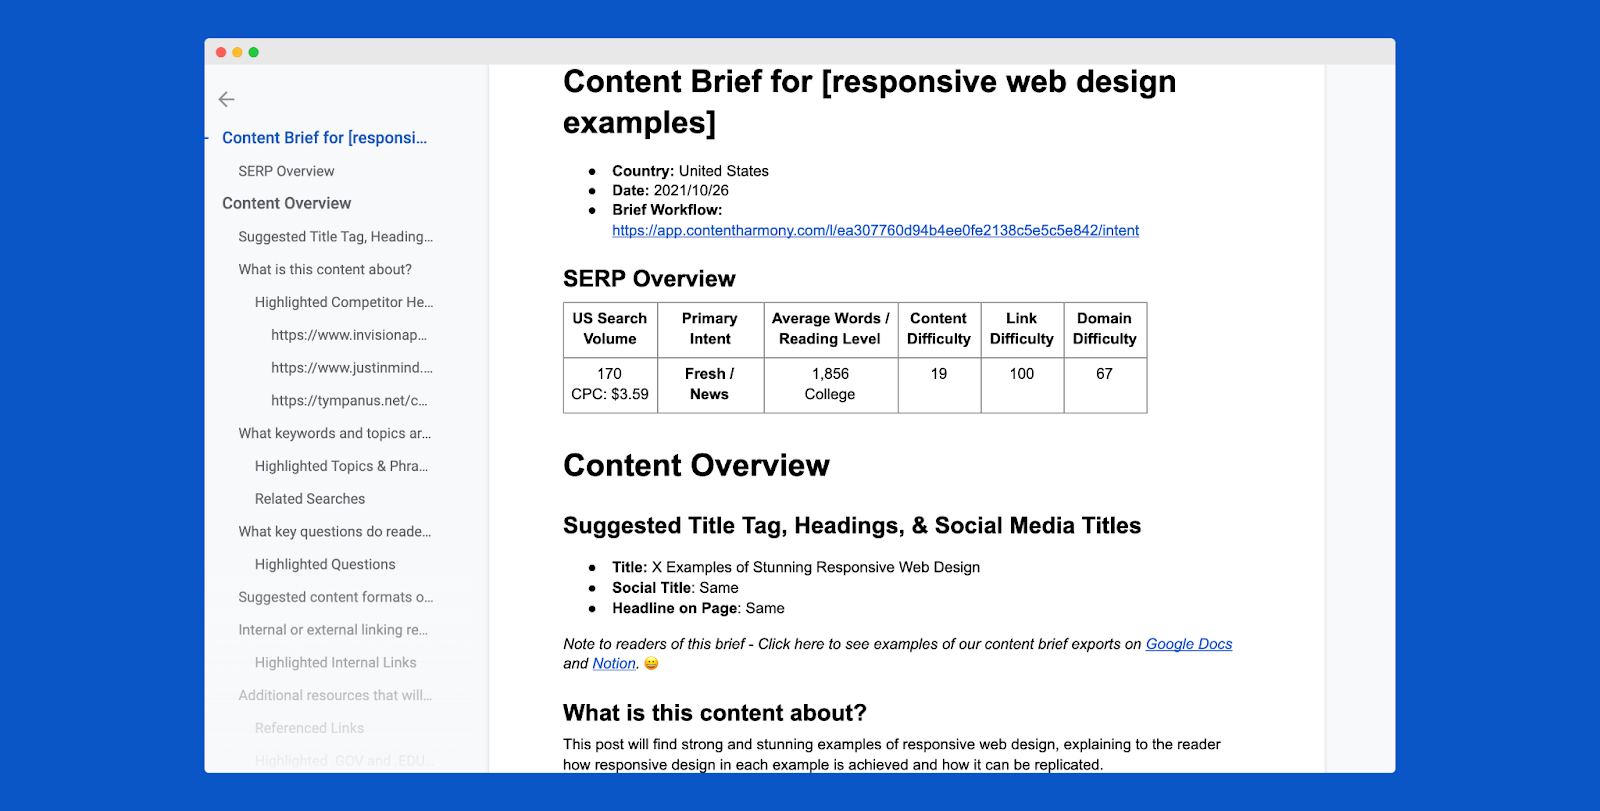 Example of a content brief exported from Content Harmony into Google Docs format.